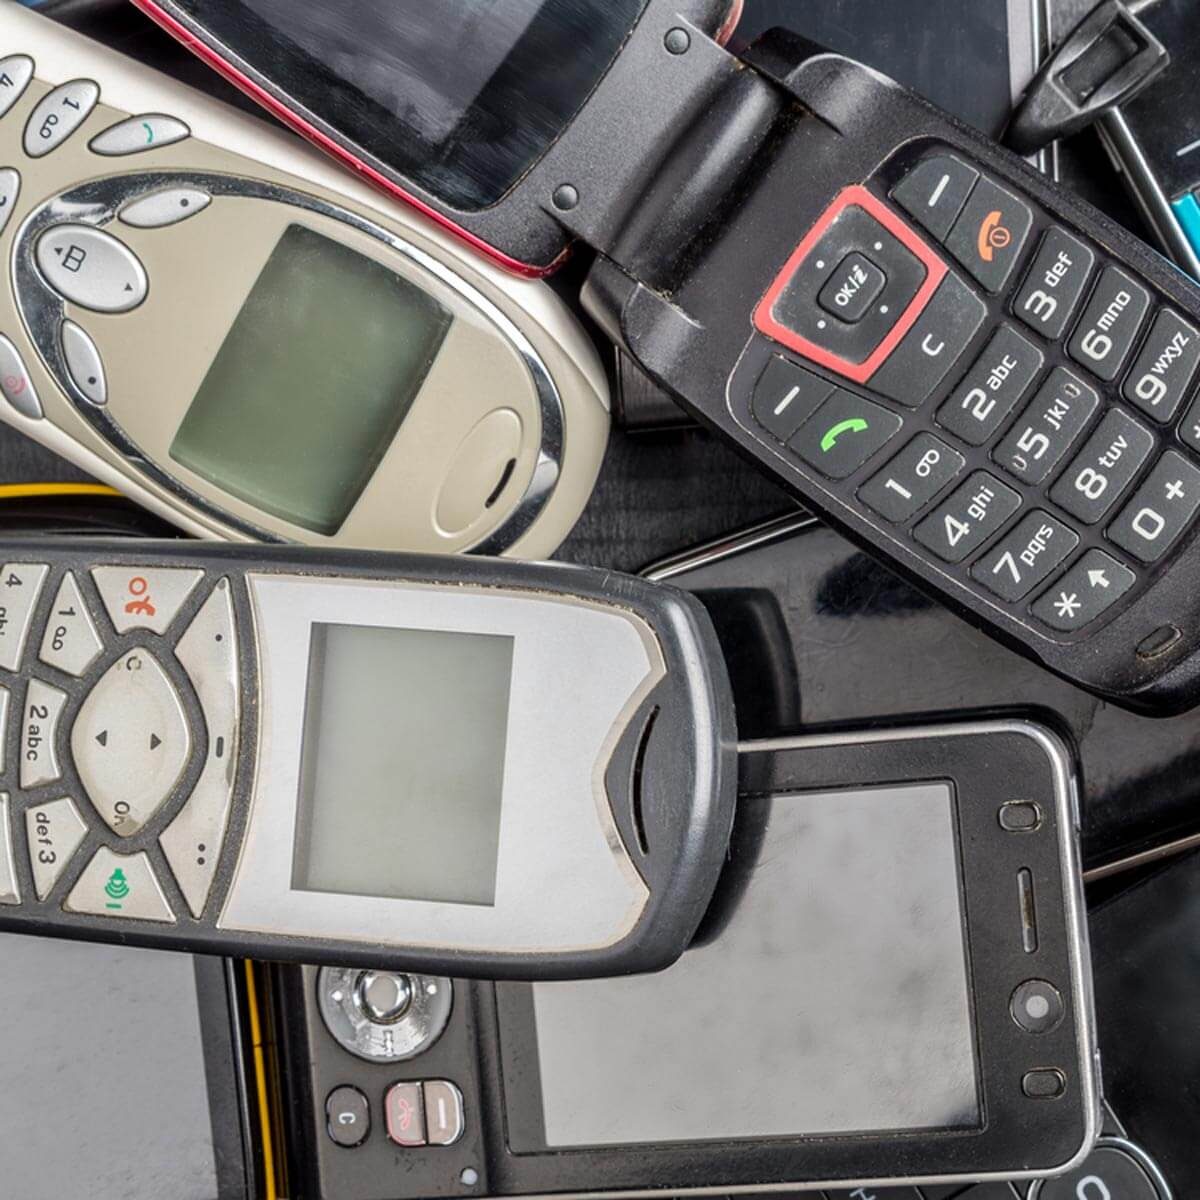 Is It Safe to Use an Old or Used Phone? Here's What You Should